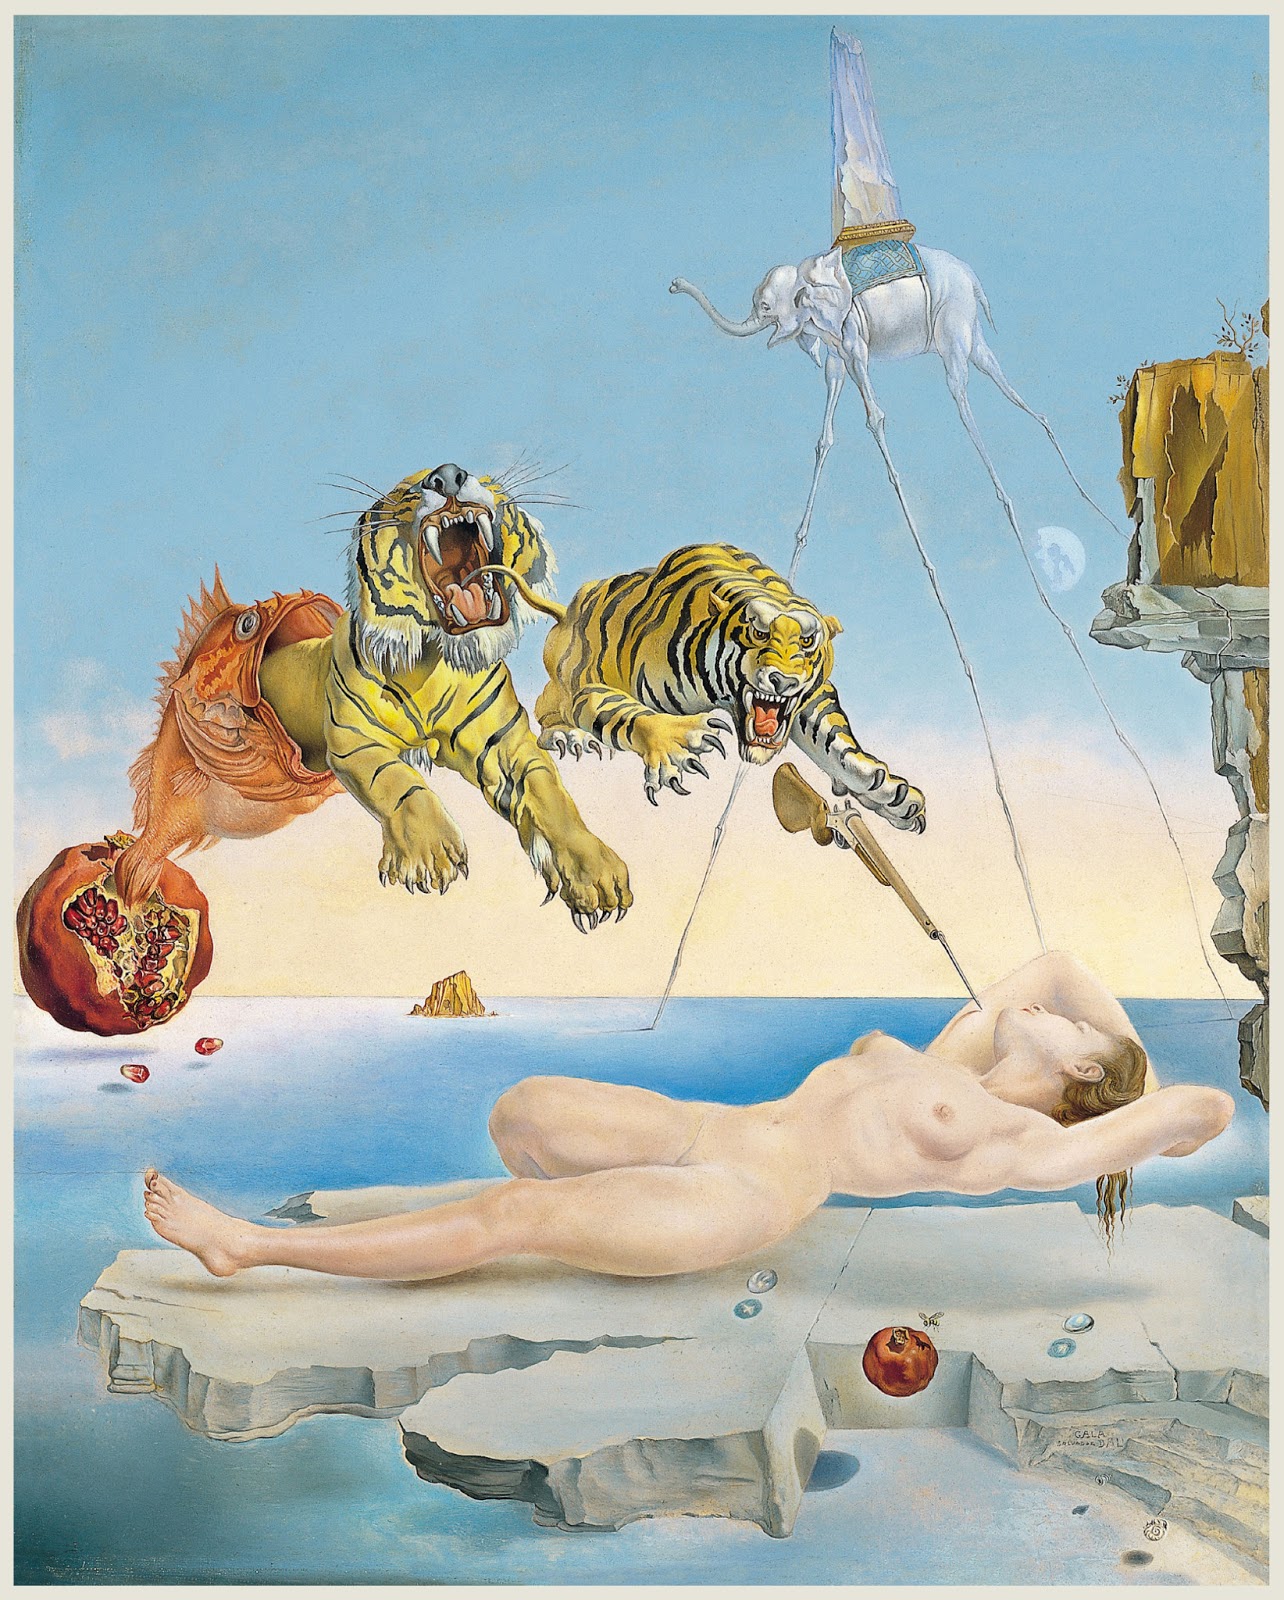 http://4.bp.blogspot.com/-0o52RBWrLgk/UP8RyP7RKDI/AAAAAAAAAMs/L9InRsohWxA/s1600/Salvador-Dali%CC%81-Dream-caused-by-the-Flight-of-a-Bee-around-a-Pomegranate-a-Second-before-Waking-up-1944.jpg